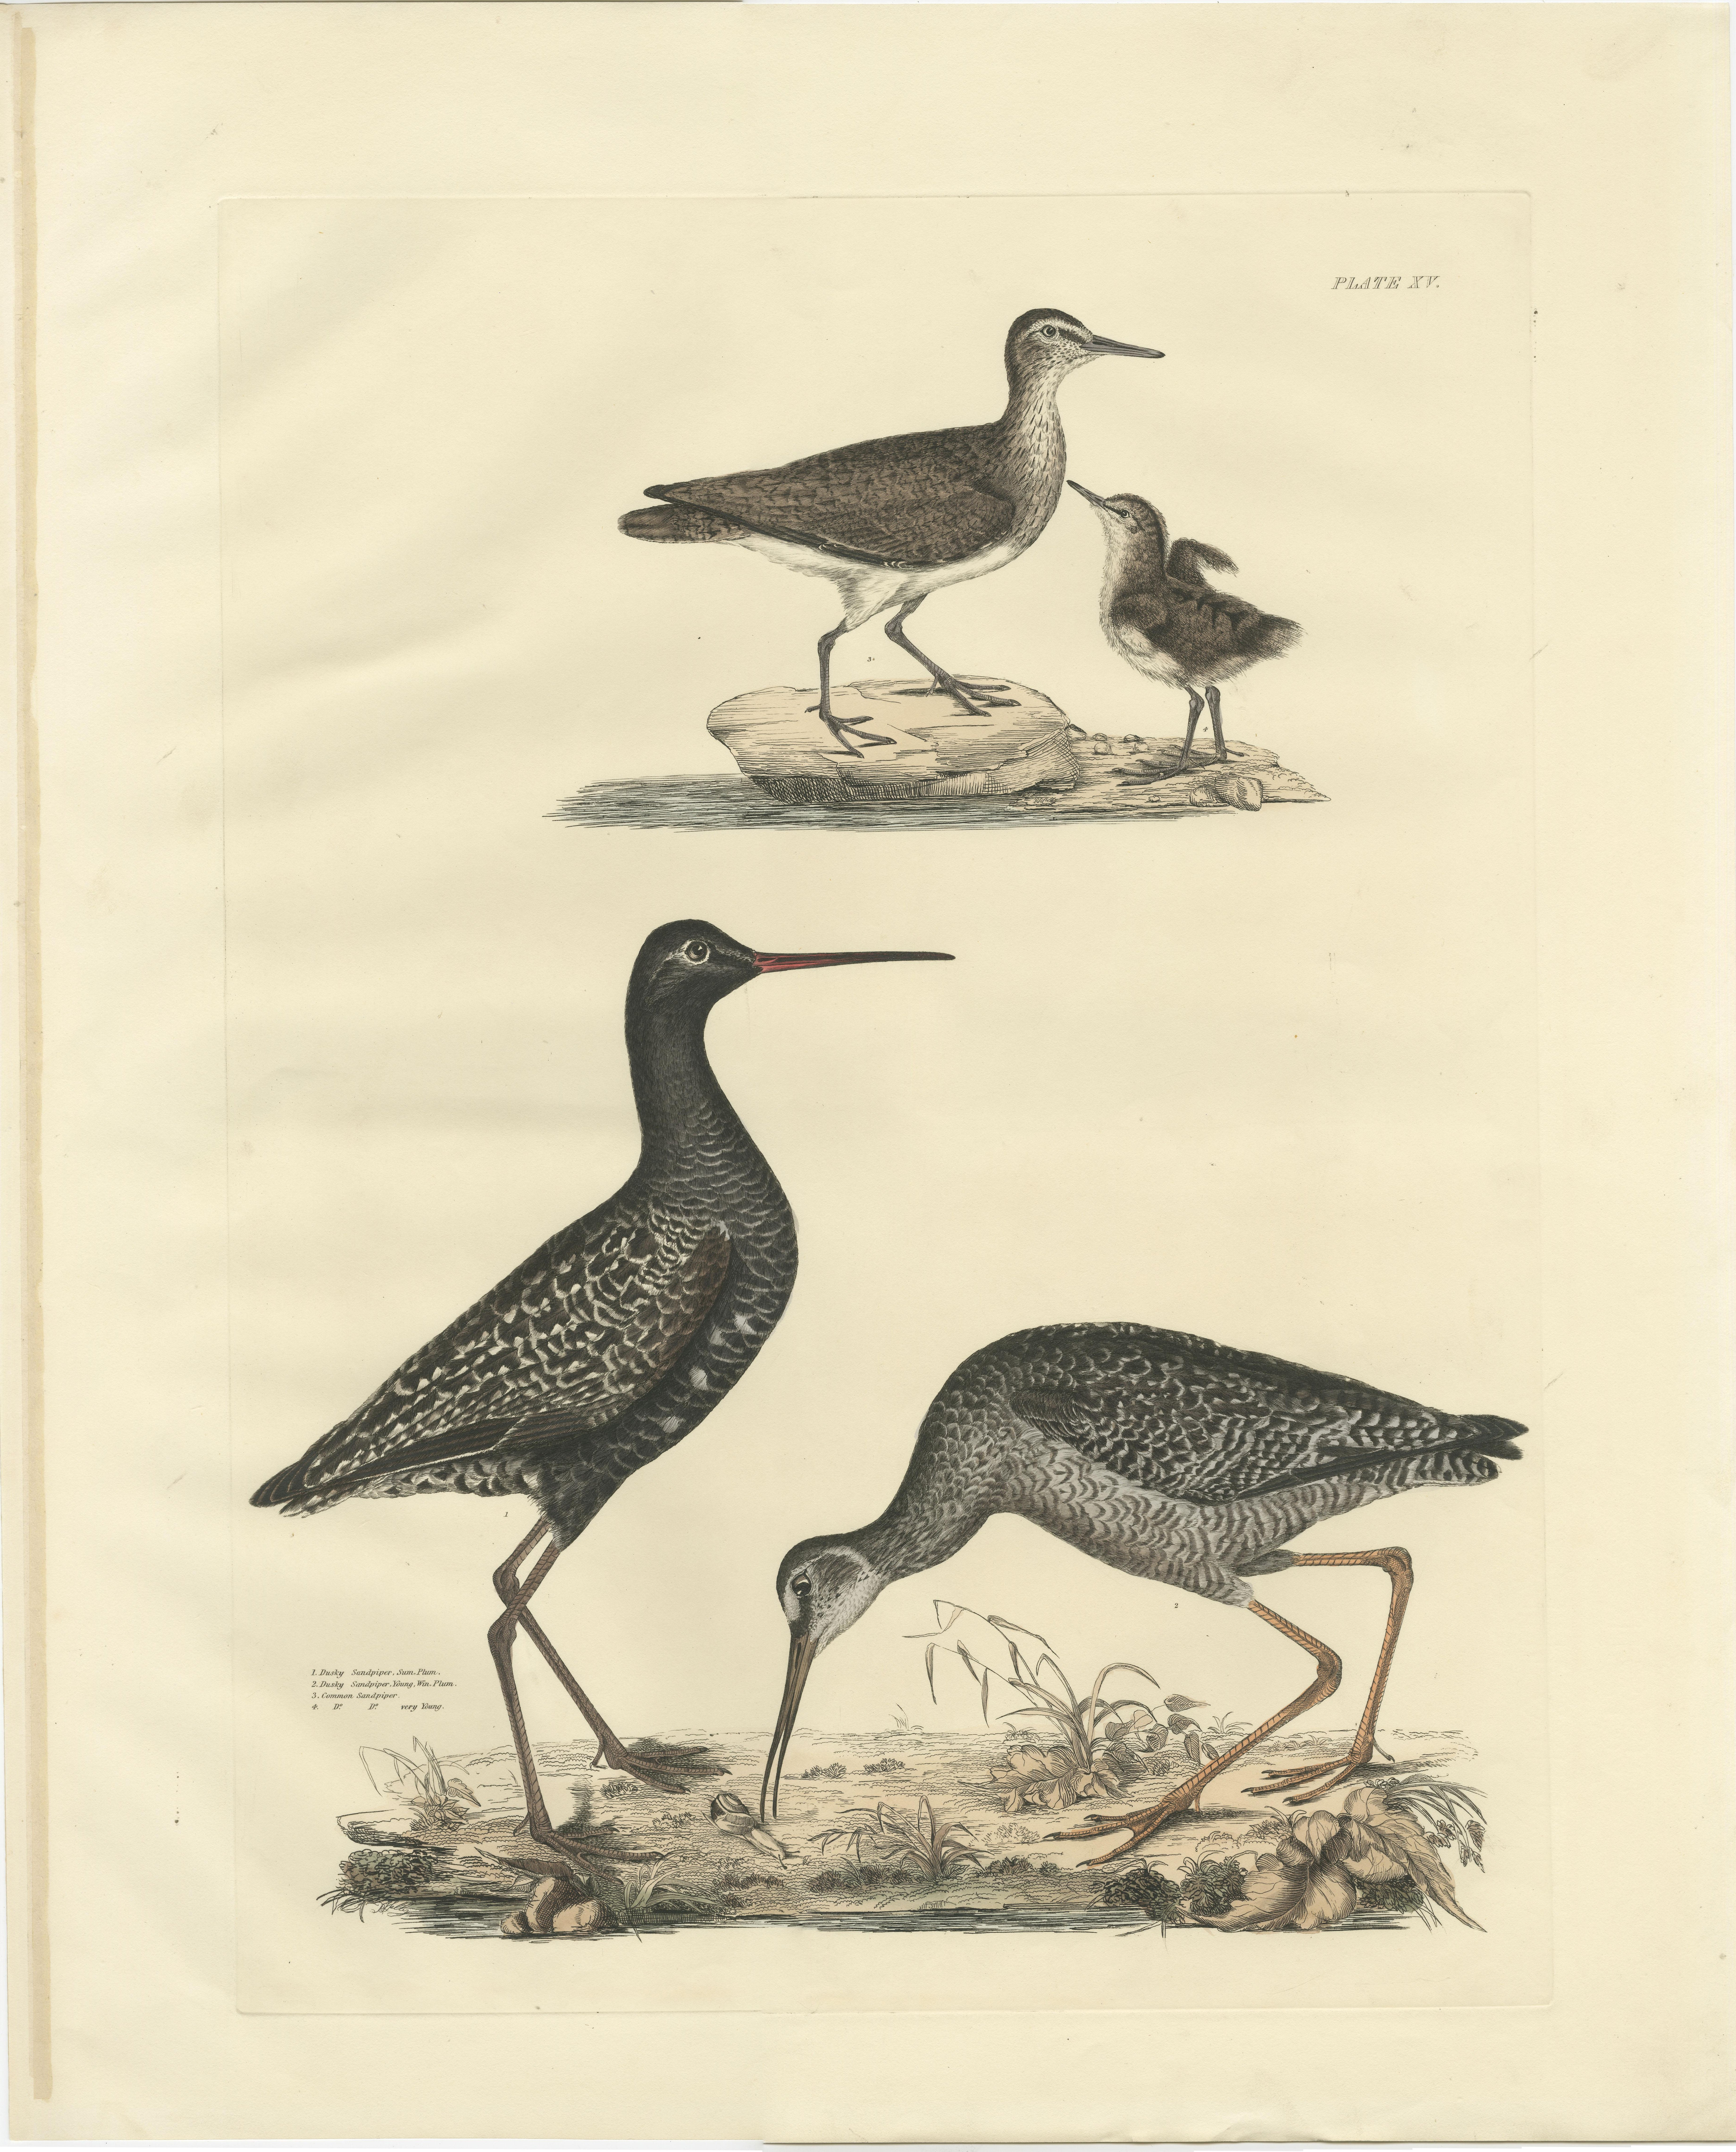 Large original hand-colored antique ornithological print made by Selby and published around 1826. 

This particular print from Prideaux John Selby's 